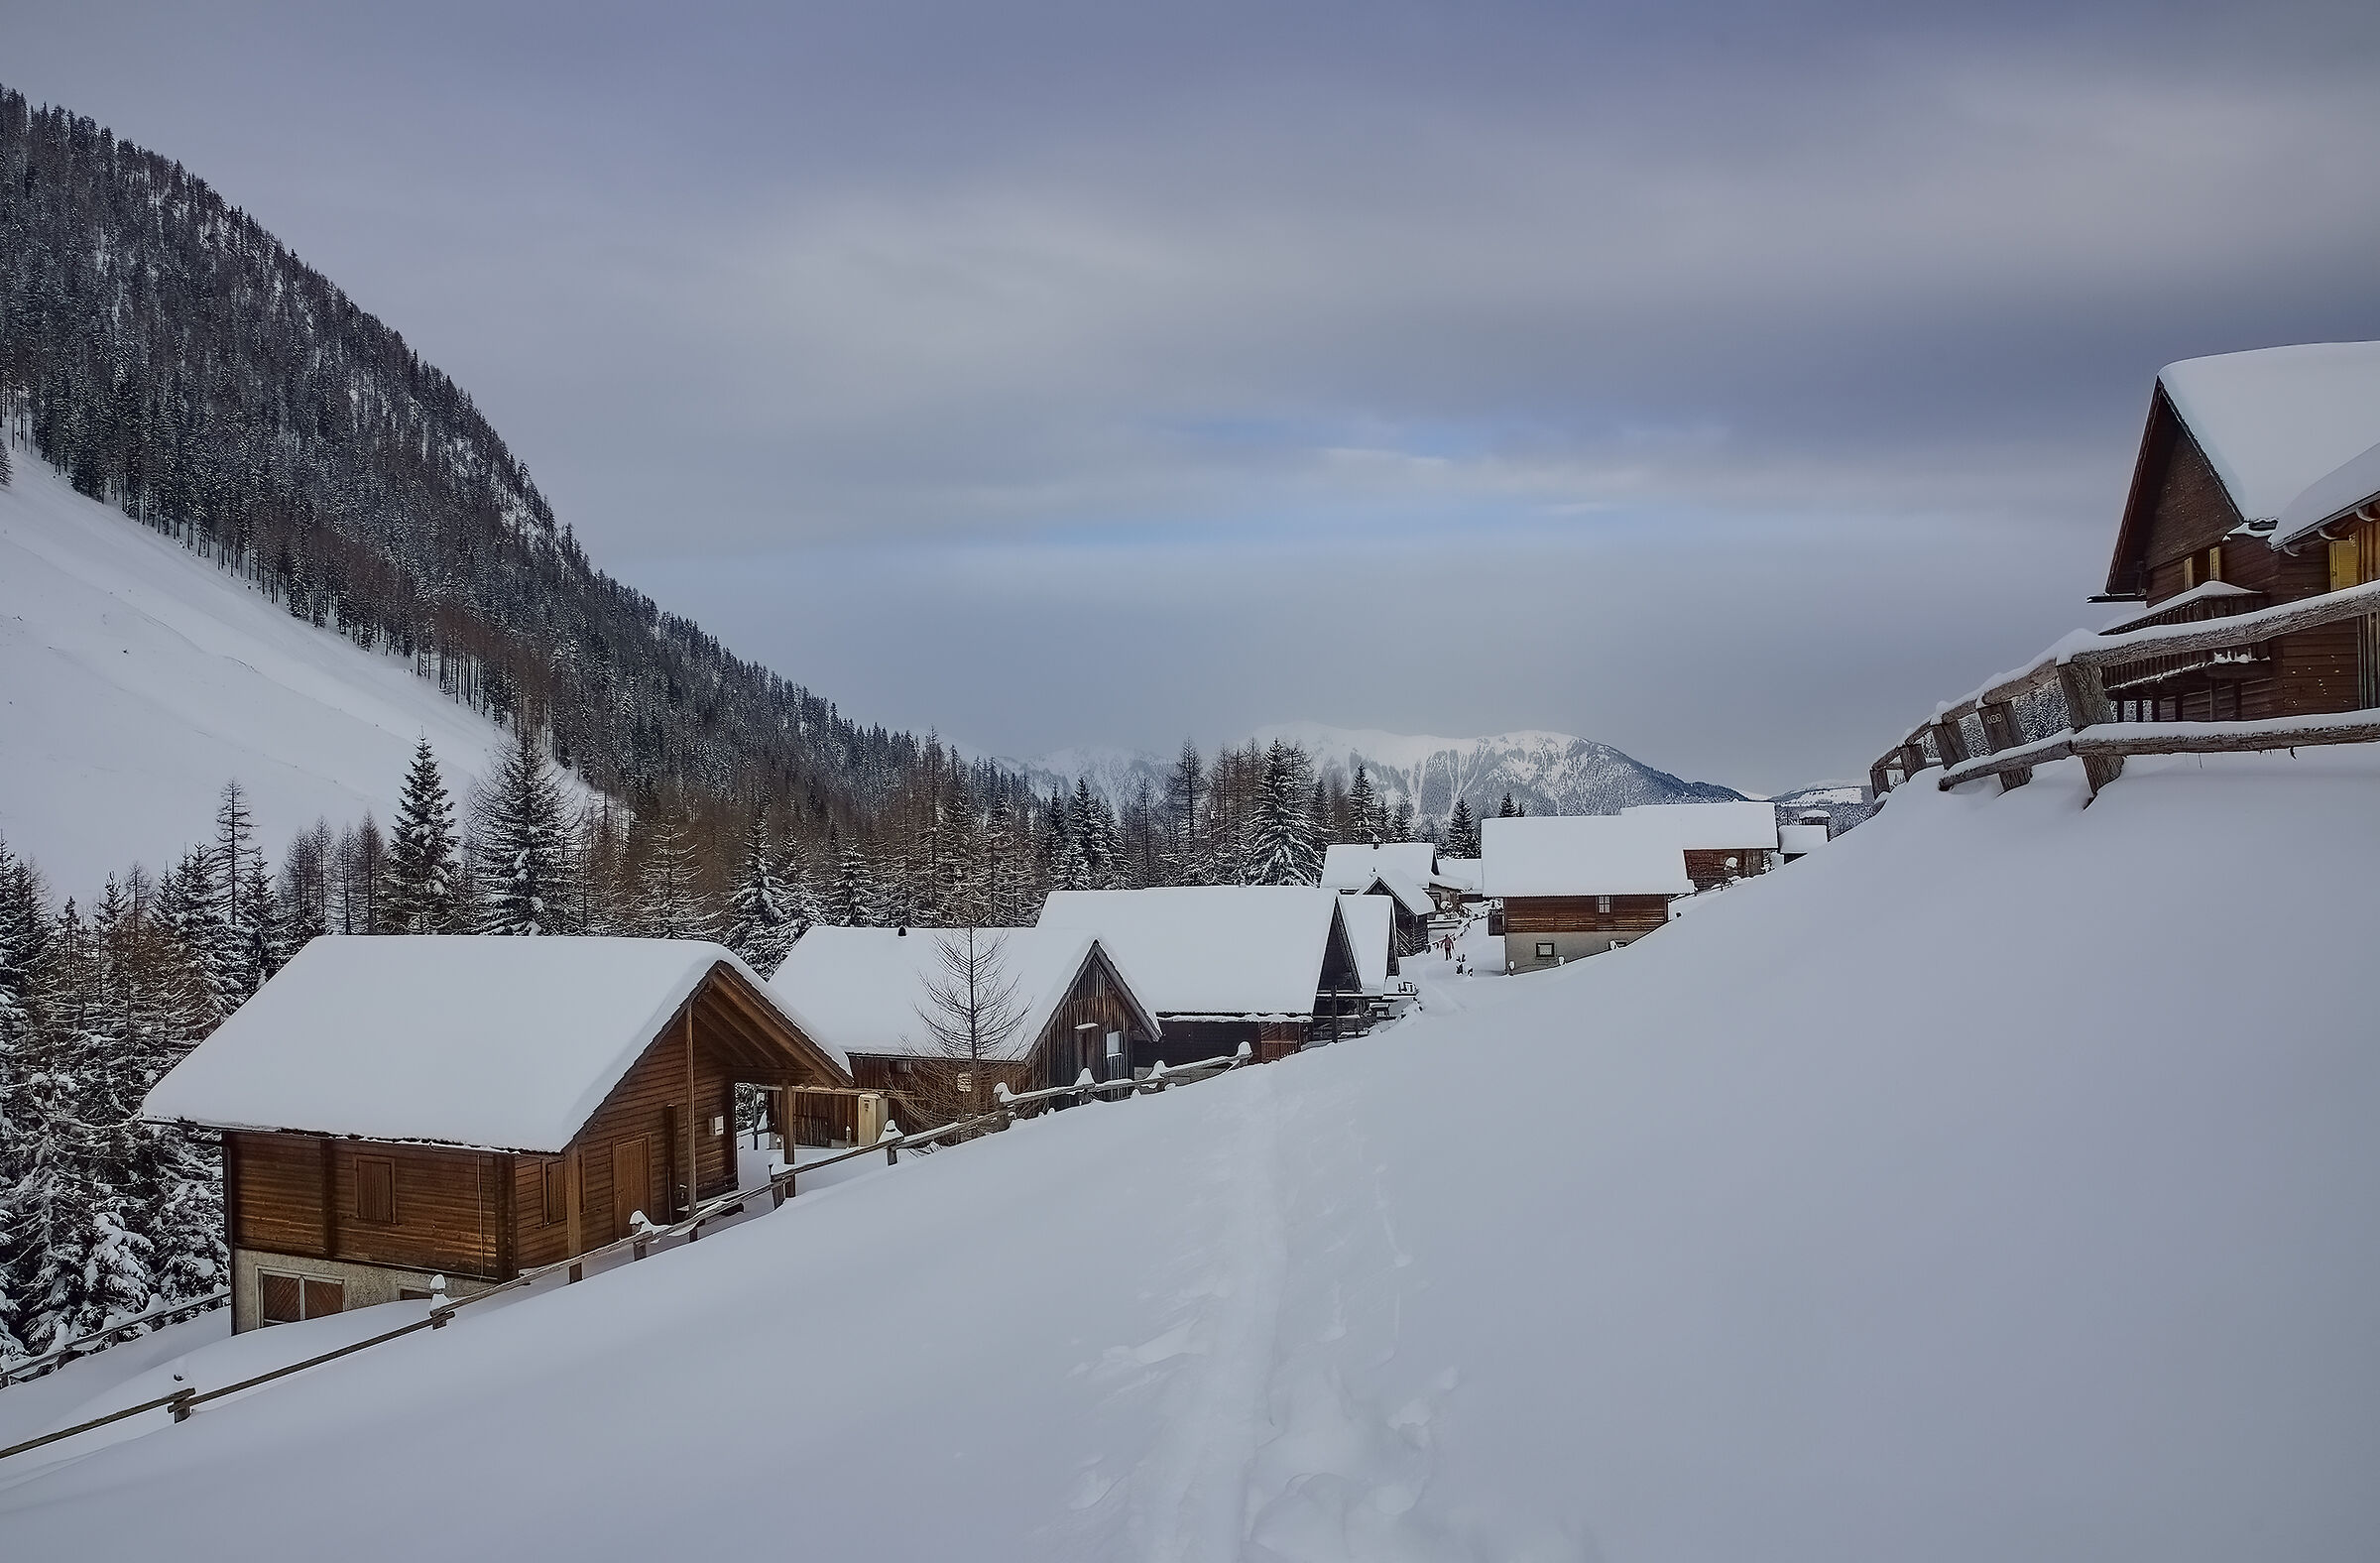 Huts in the Carnic border Alps...